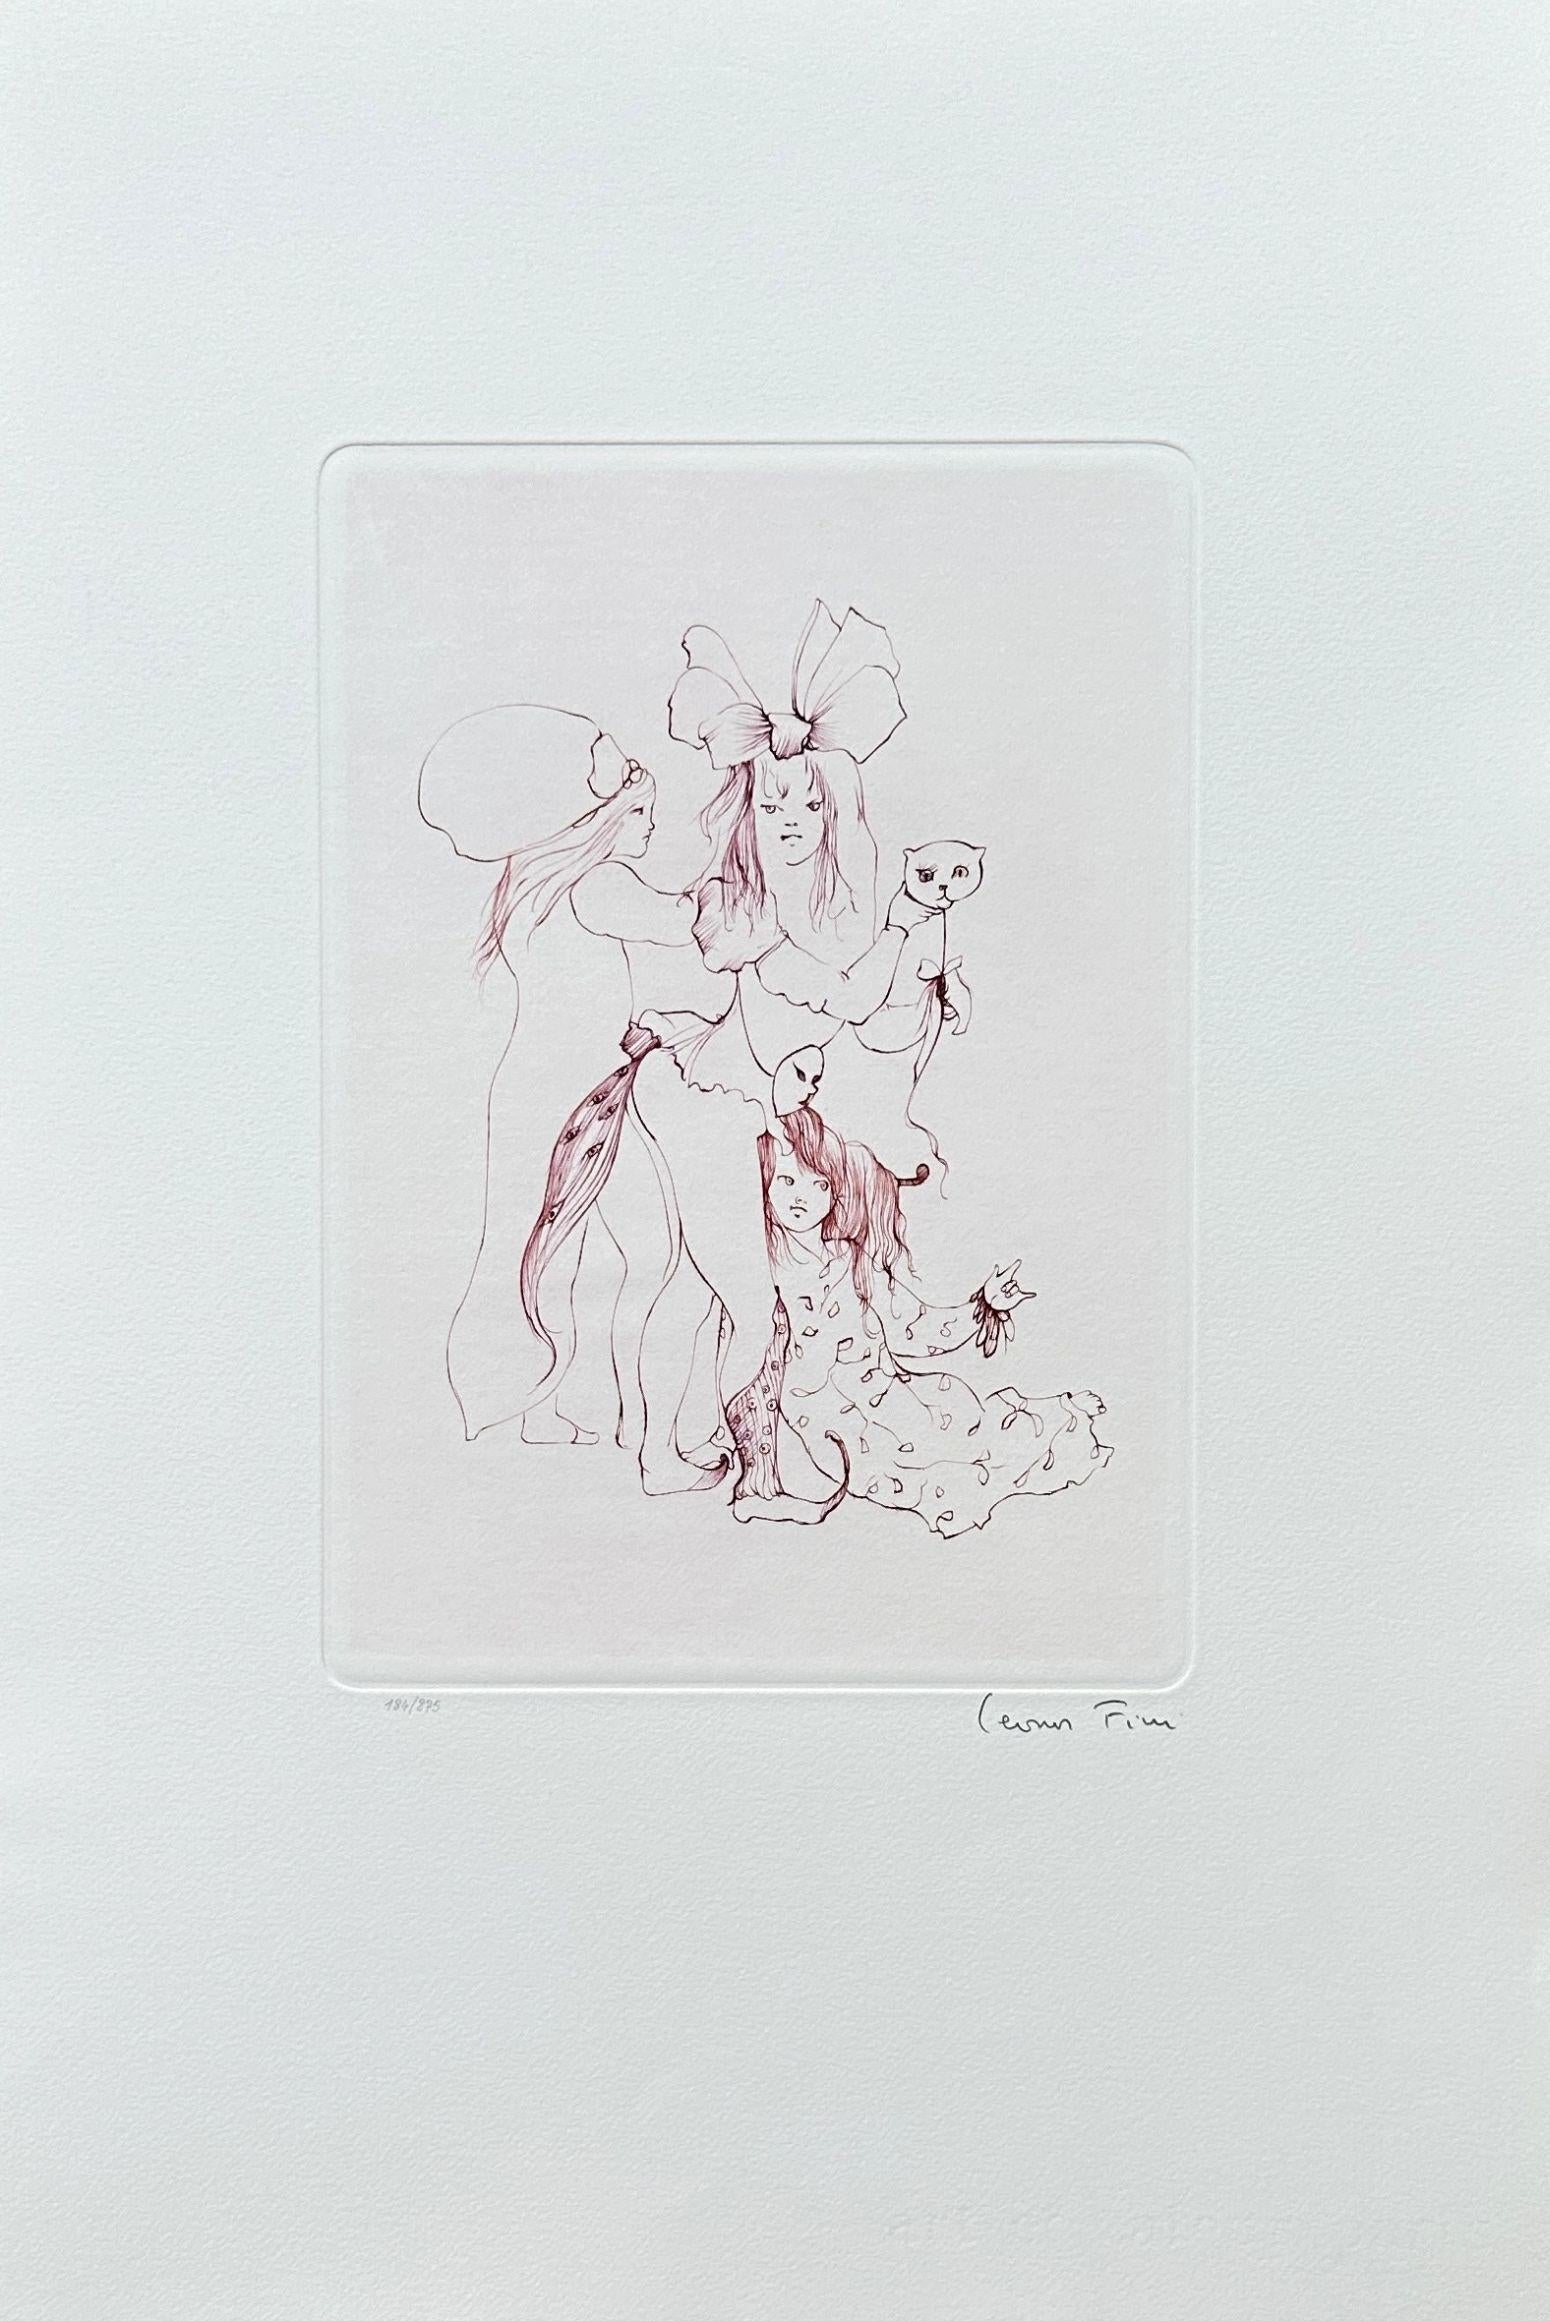 Leonor Fini Figurative Print - Three Sisters With a Cat - Original Etching Hand Signed & Numbered